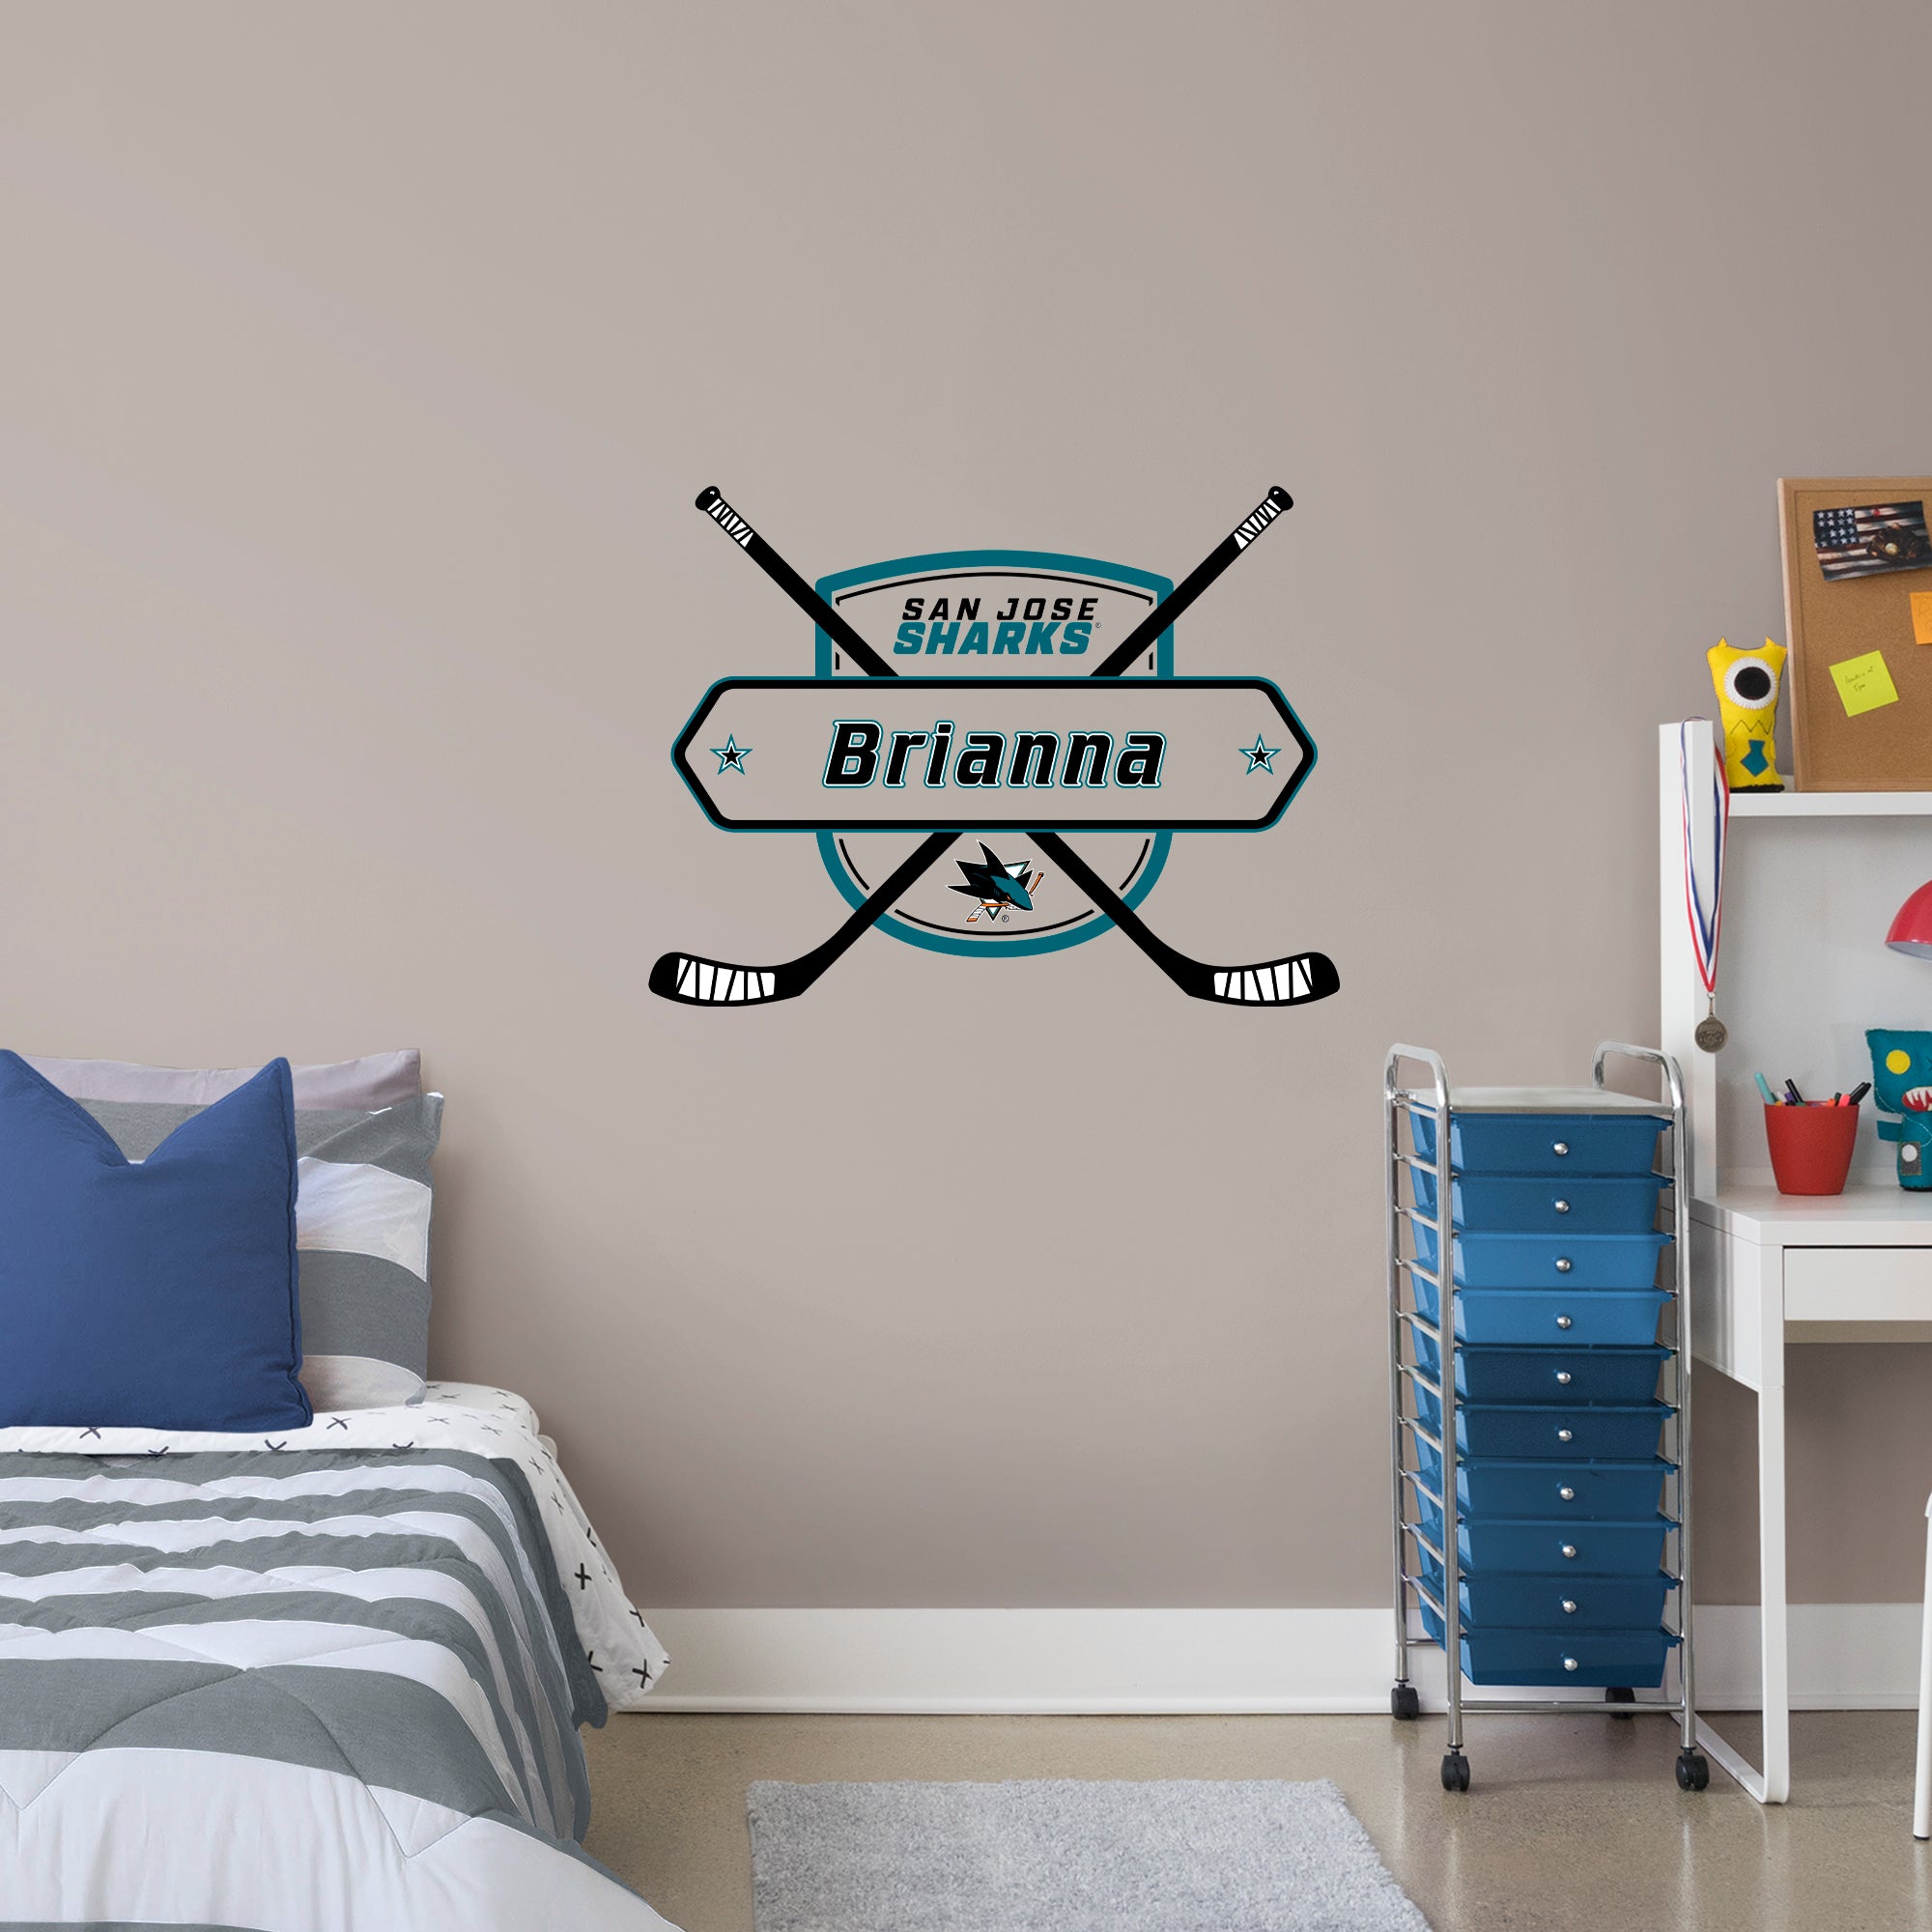 San Jose Sharks 2020 Sticks Personalized Name PREMASK - Officially Licensed NHL Removable Wall Decal Giant Transfer Decal (38"W